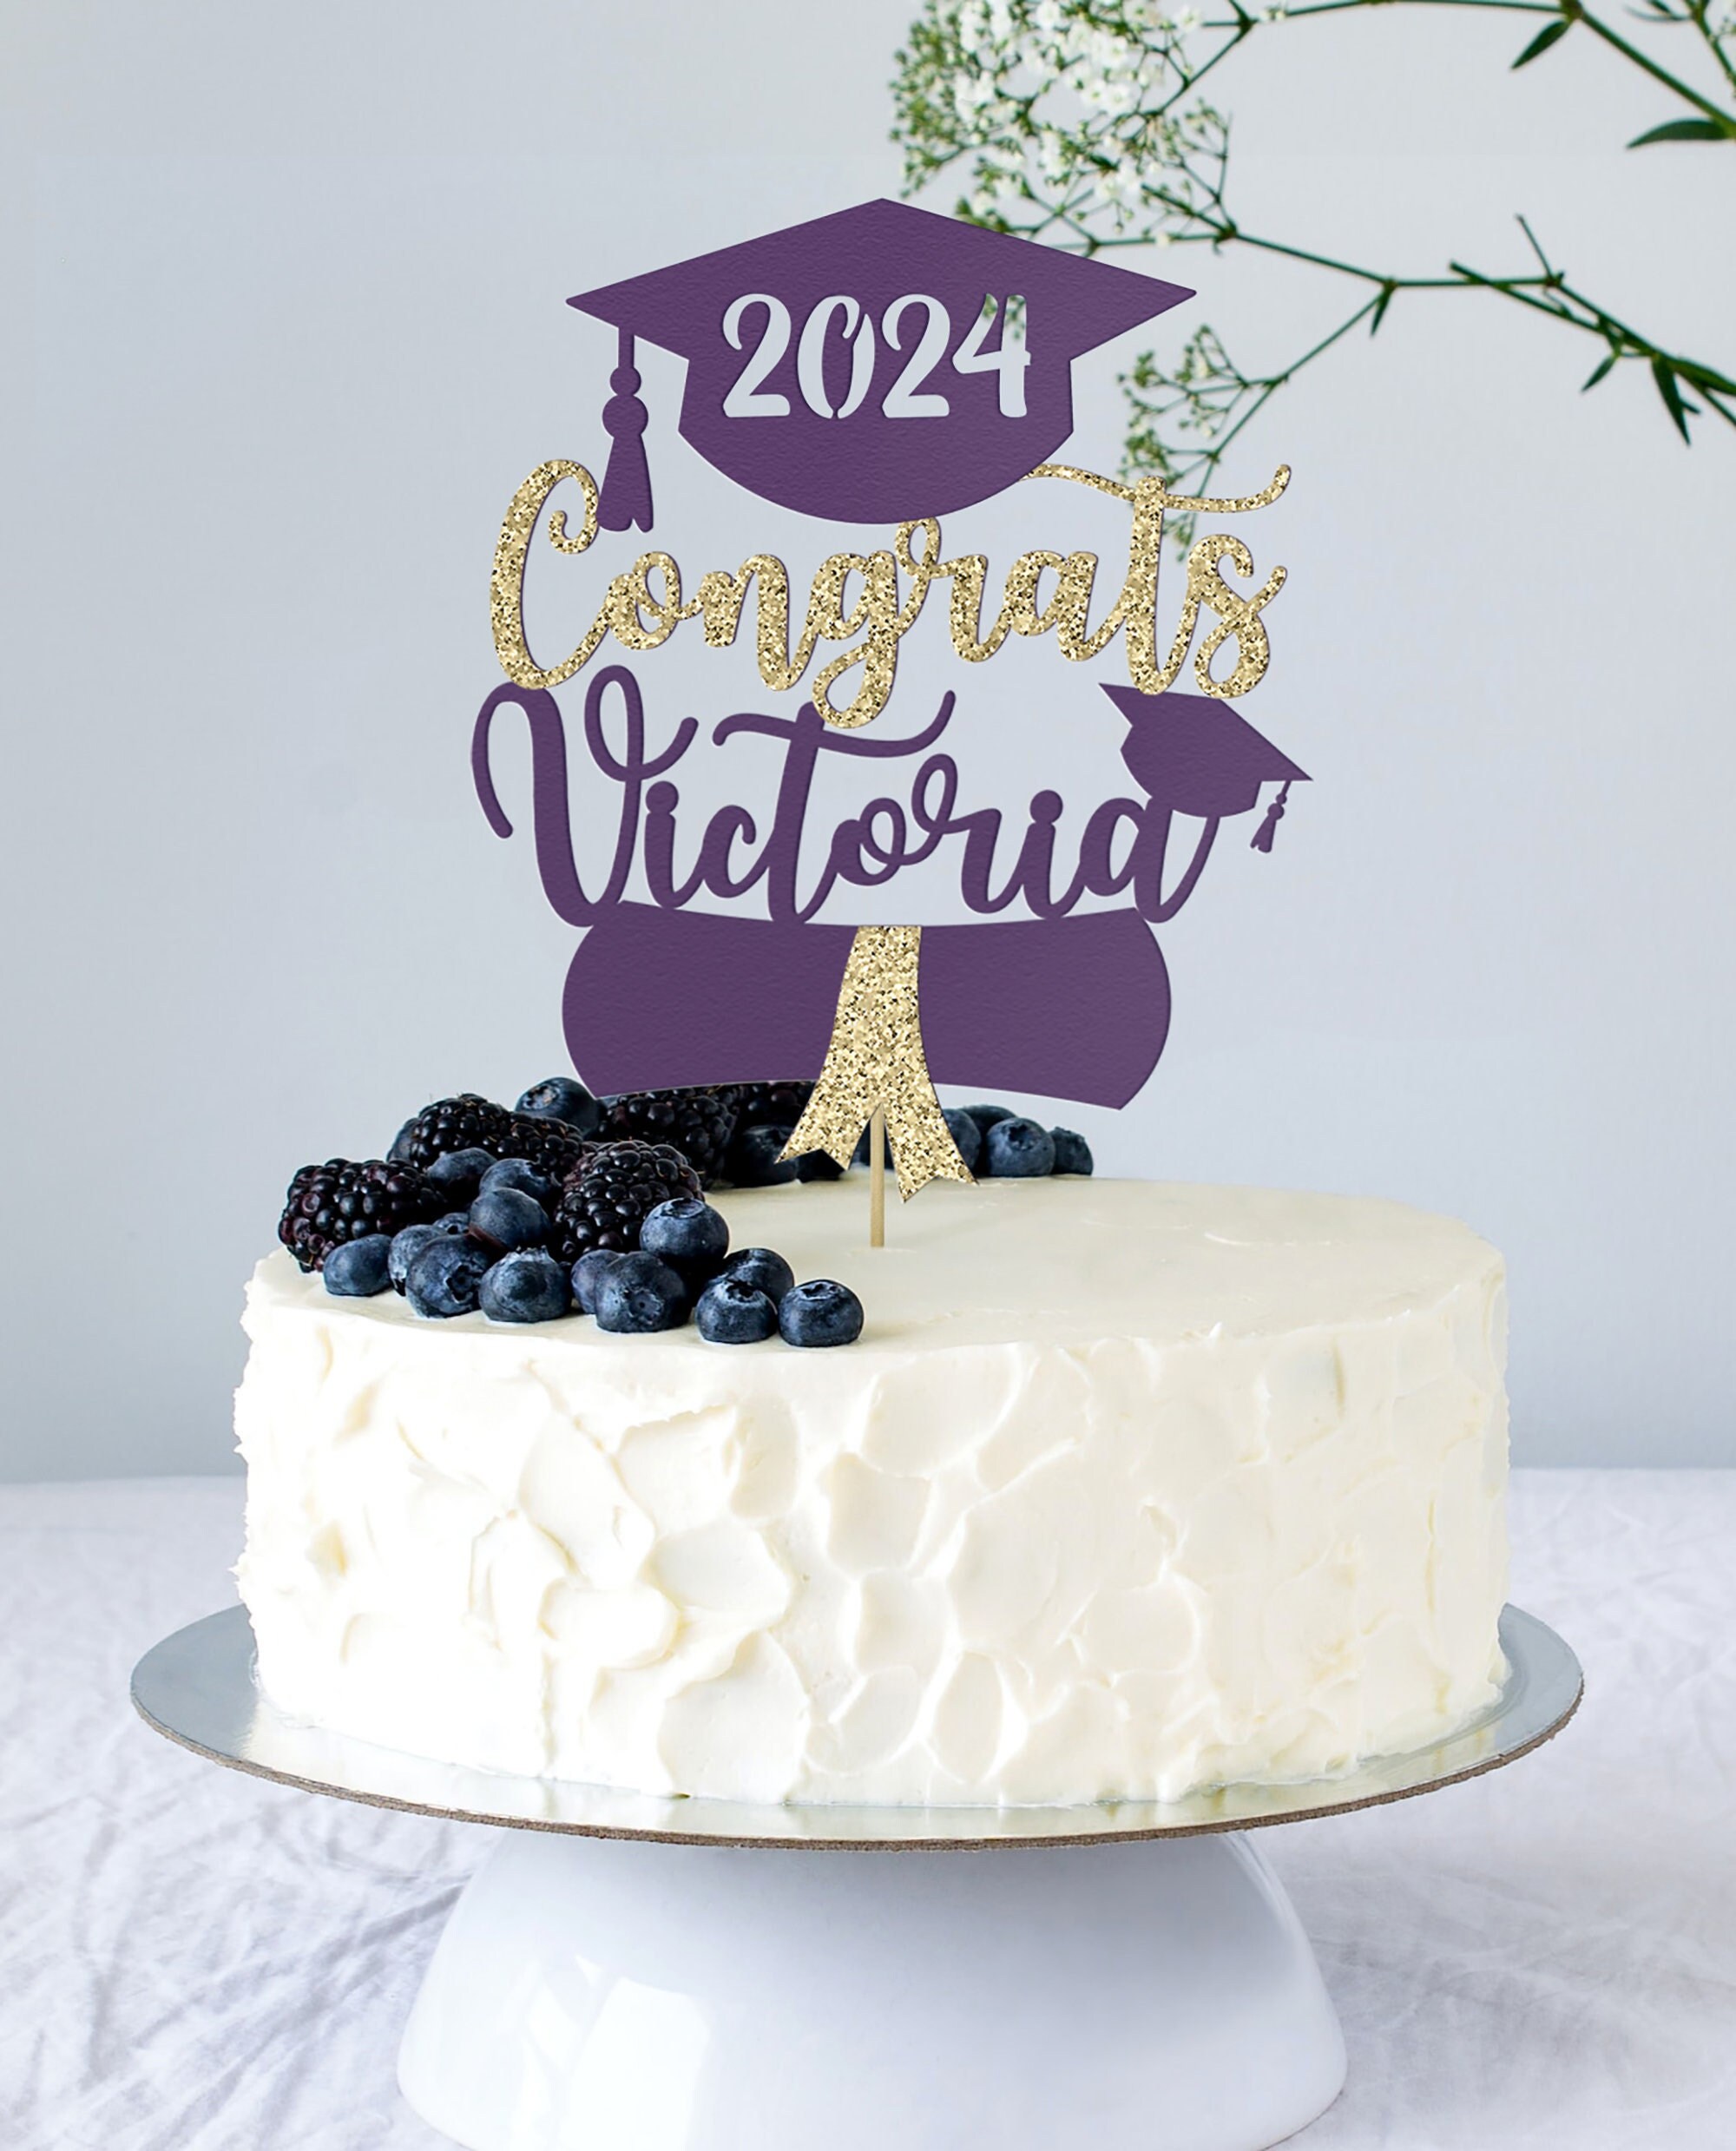 Graduation Diploma Layon Cake Topper and 1 Paper Diploma - - Includes 12  Thank You Reflective Stickers